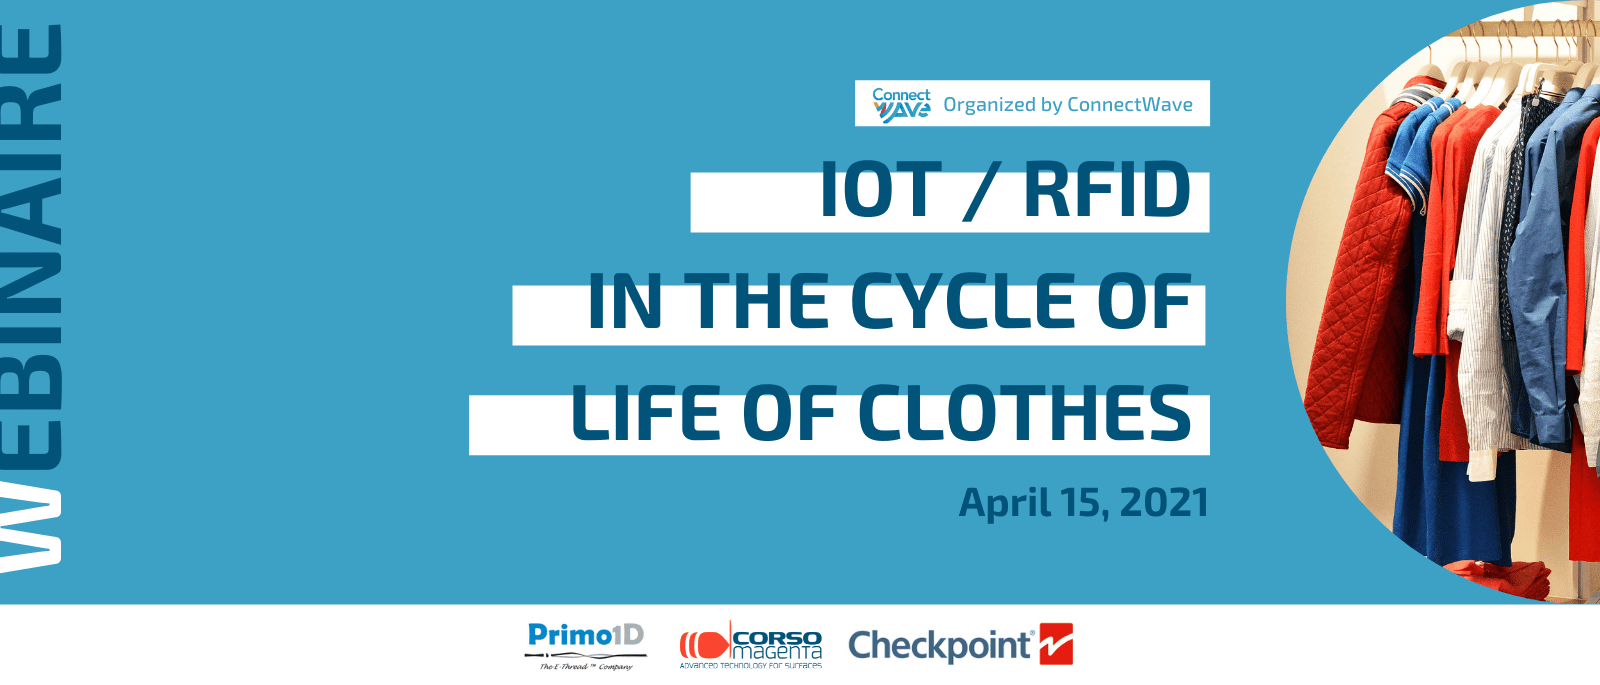 News RFID and IoT tehcnologies for manage your retail and fashion stocks